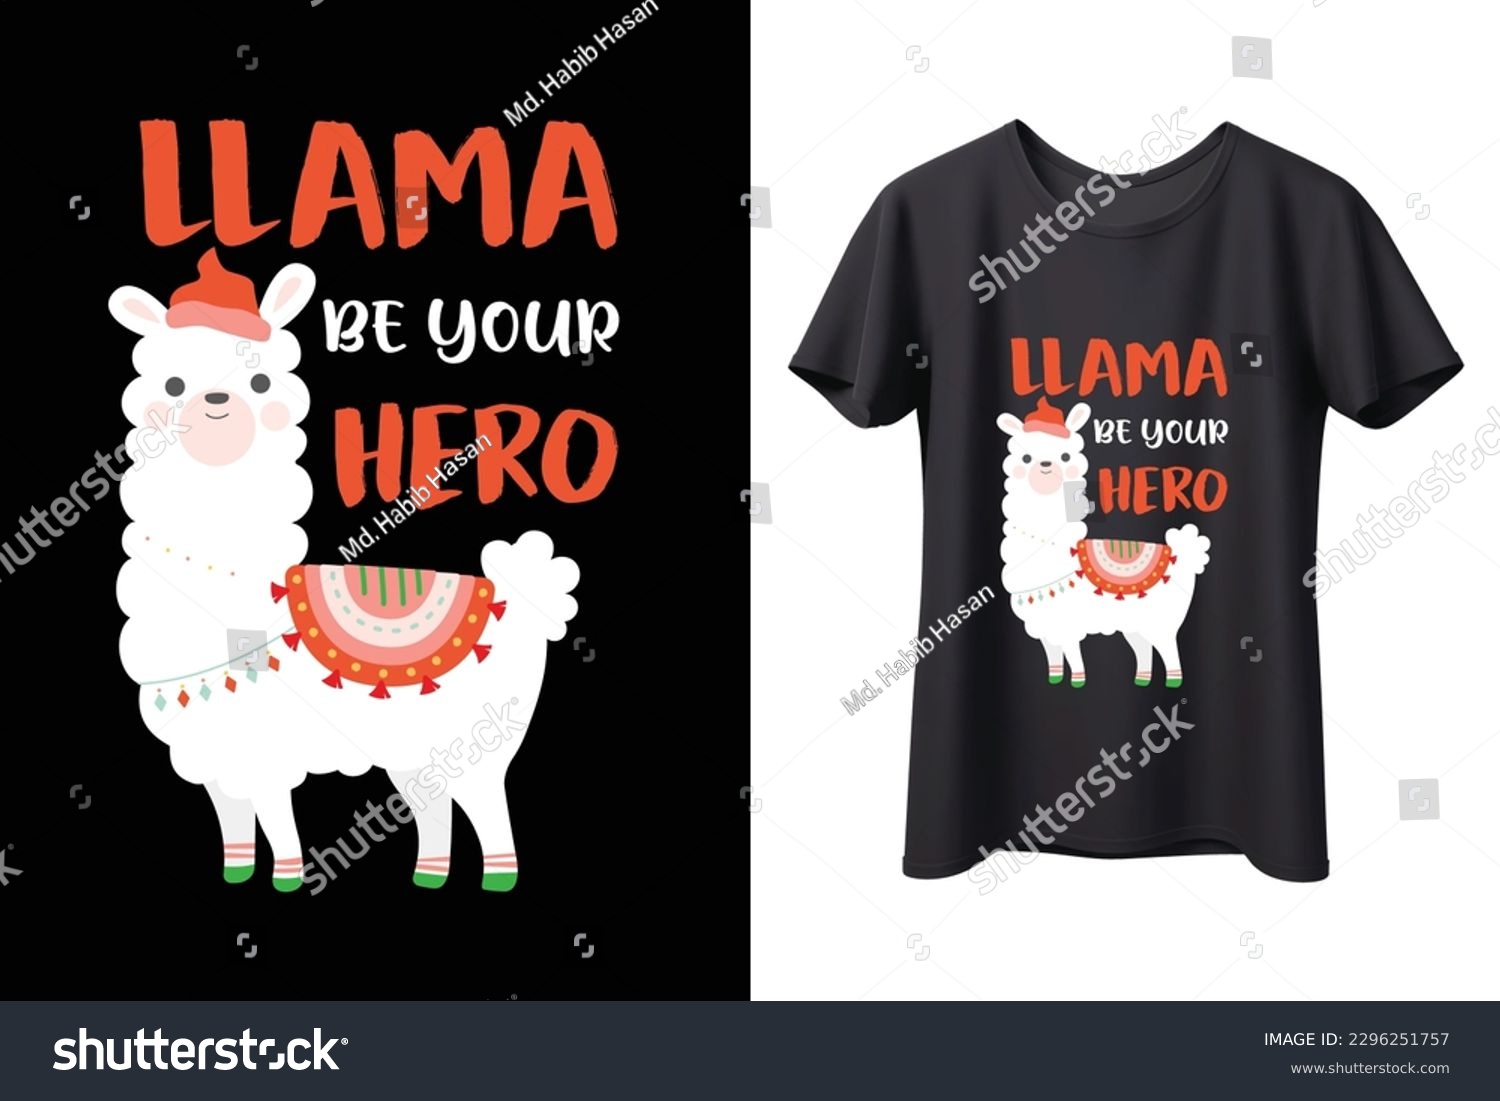 SVG of Llama t-shirt for women and mom. Makes a great birthday party, Christmas and Mother’s Day gift idea for mother, daughter, sister and llama lover. svg